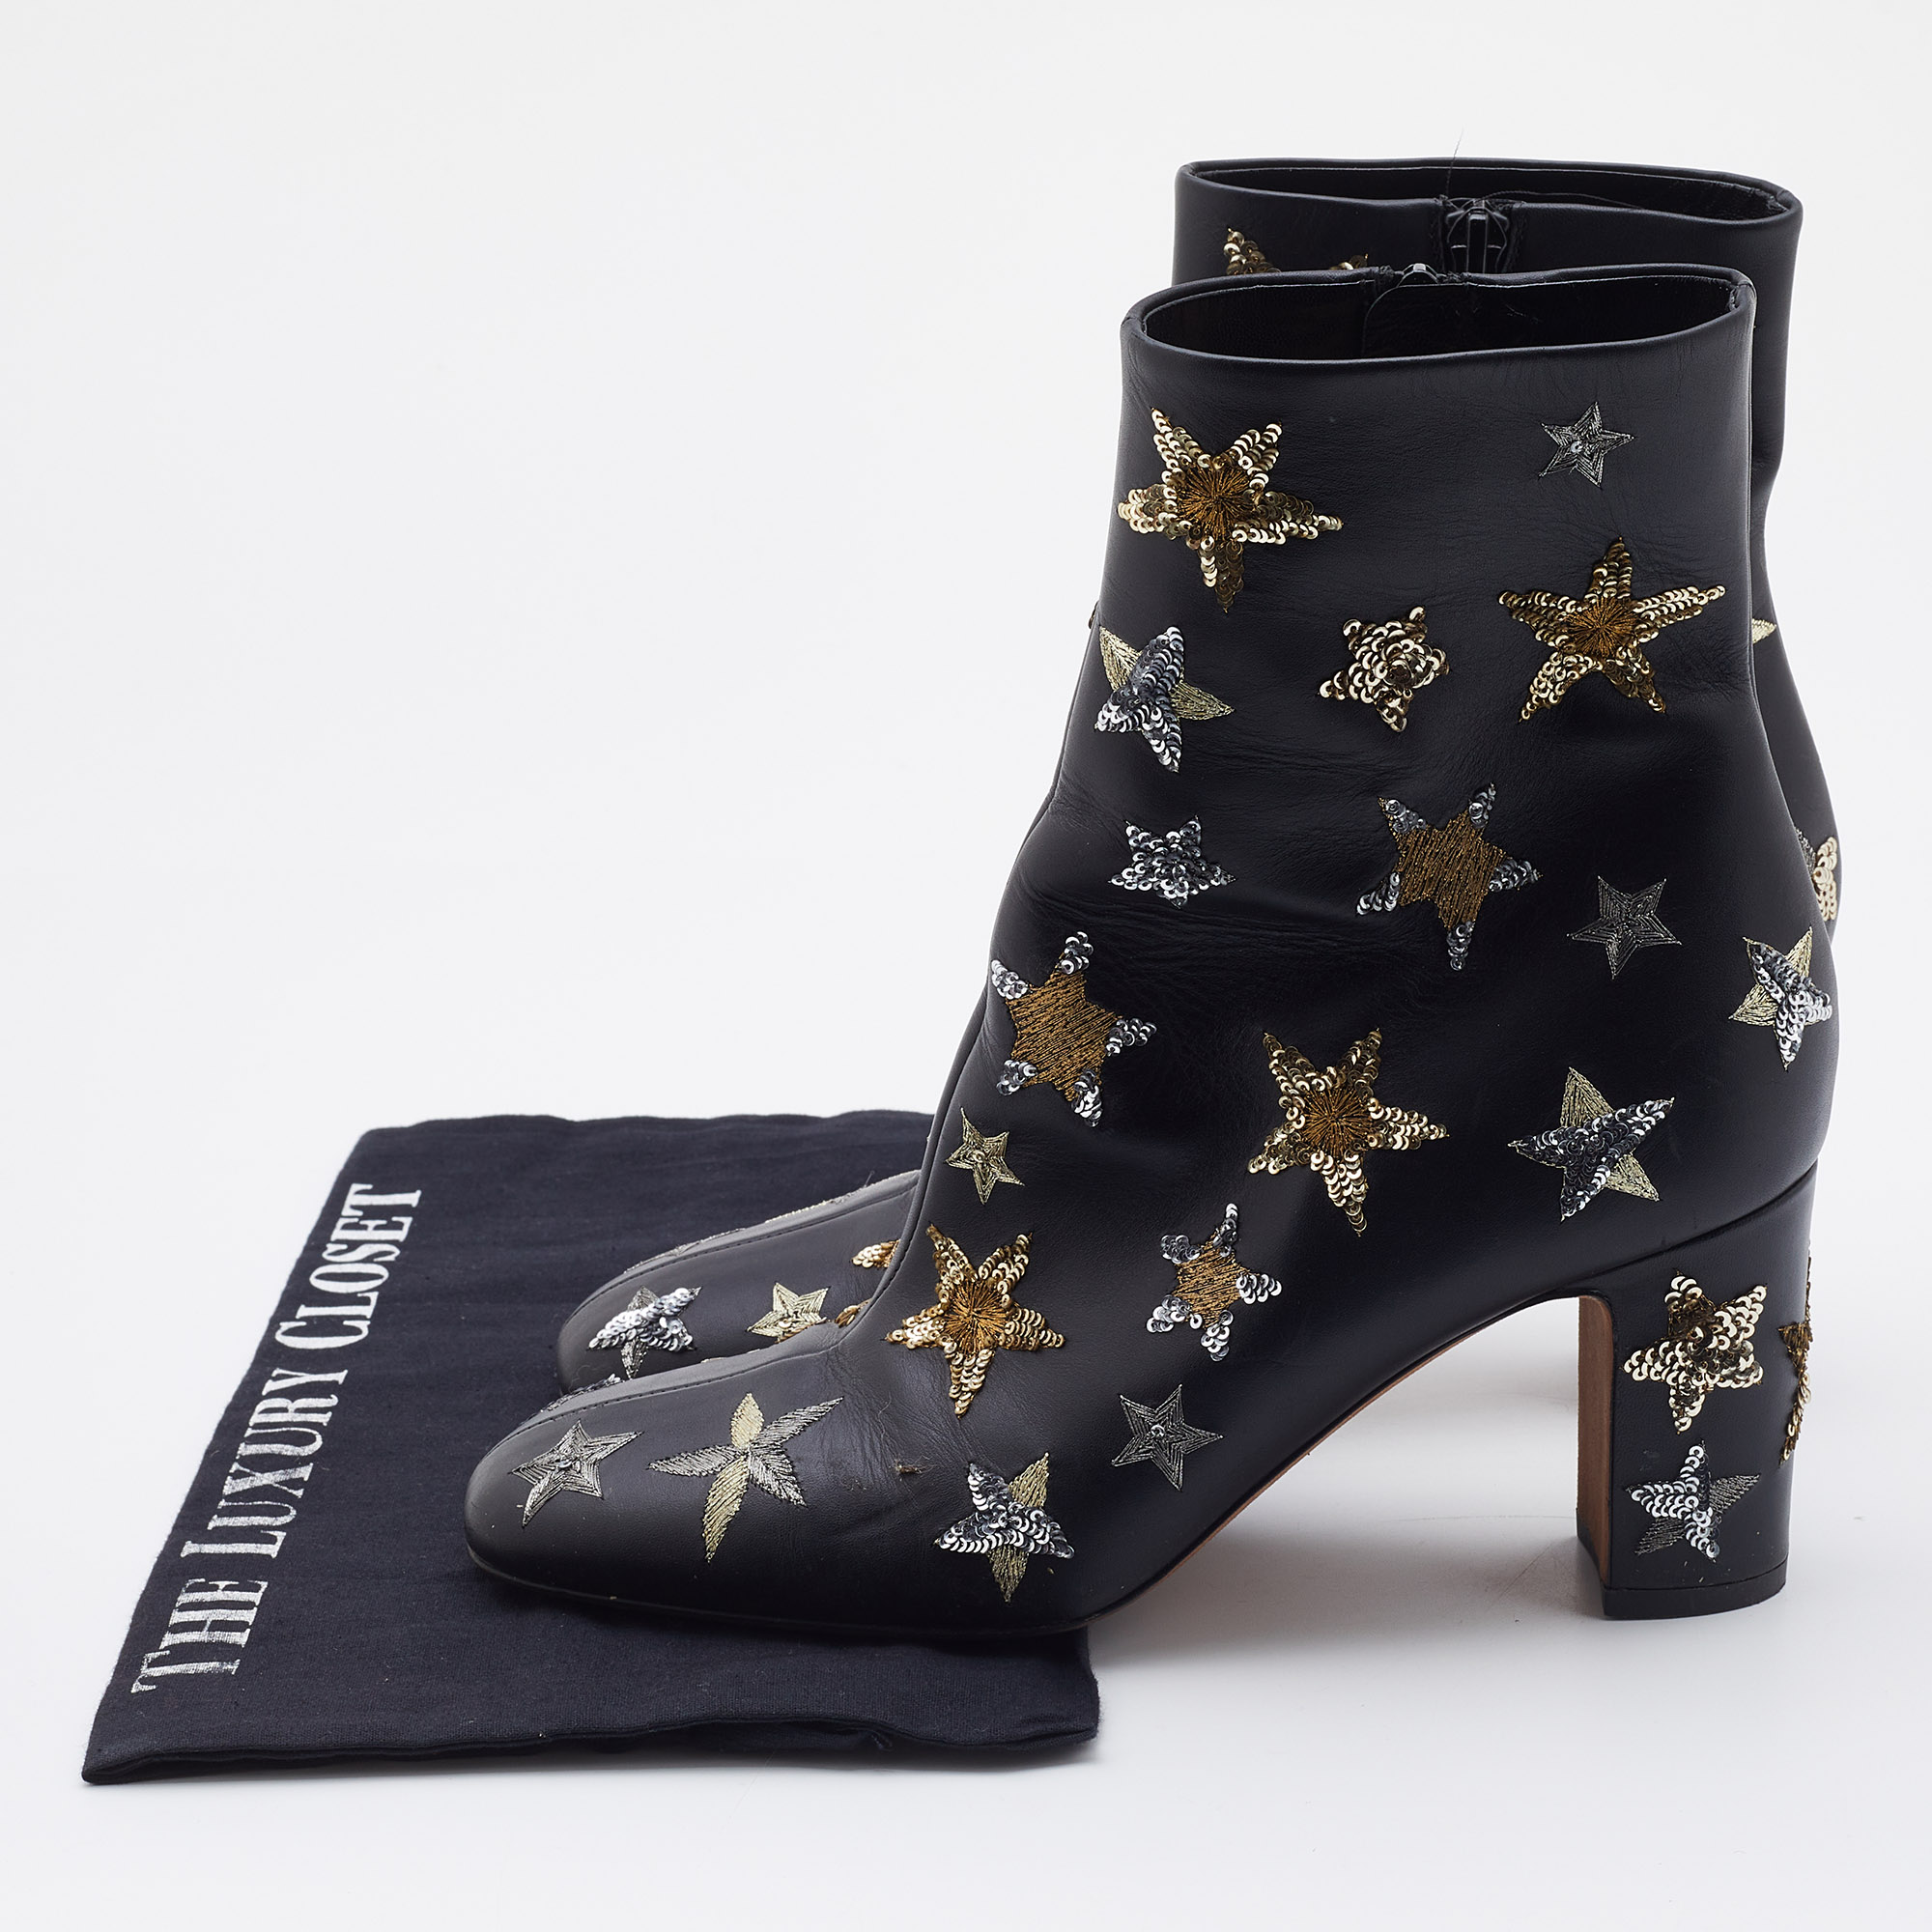 Valentino Black Leather Embroidered Sequin/Stars Ankle Length Boots Size 39